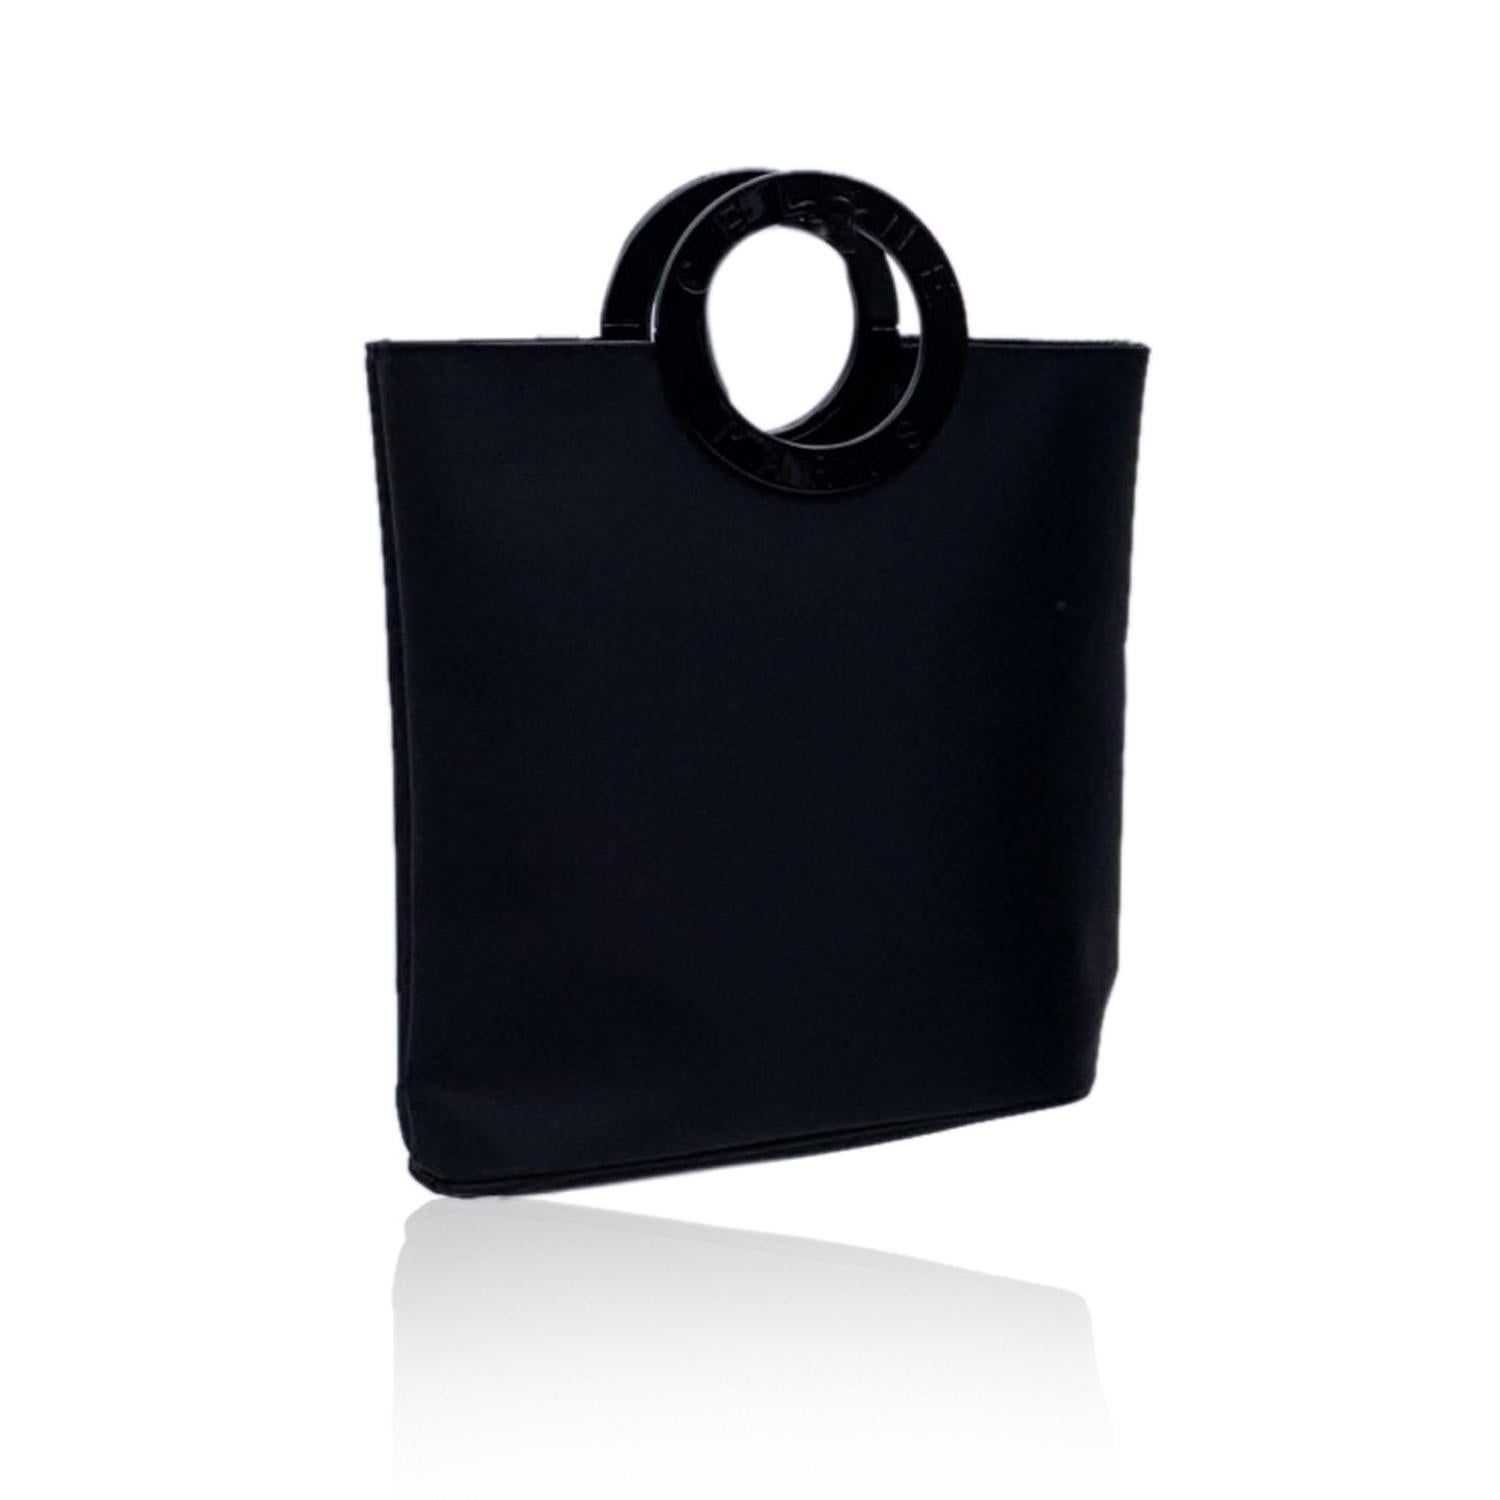 Celine black satin small tote with round plastic handles. 'Celine - Paris' engraved on handles. Open top. 1 side open pocket inside

Details

MATERIAL: Canvas

COLOR: Black

MODEL: -

GENDER: Women

COUNTRY OF MANUFACTURE: Italy

SIZE: Small

STYLE: